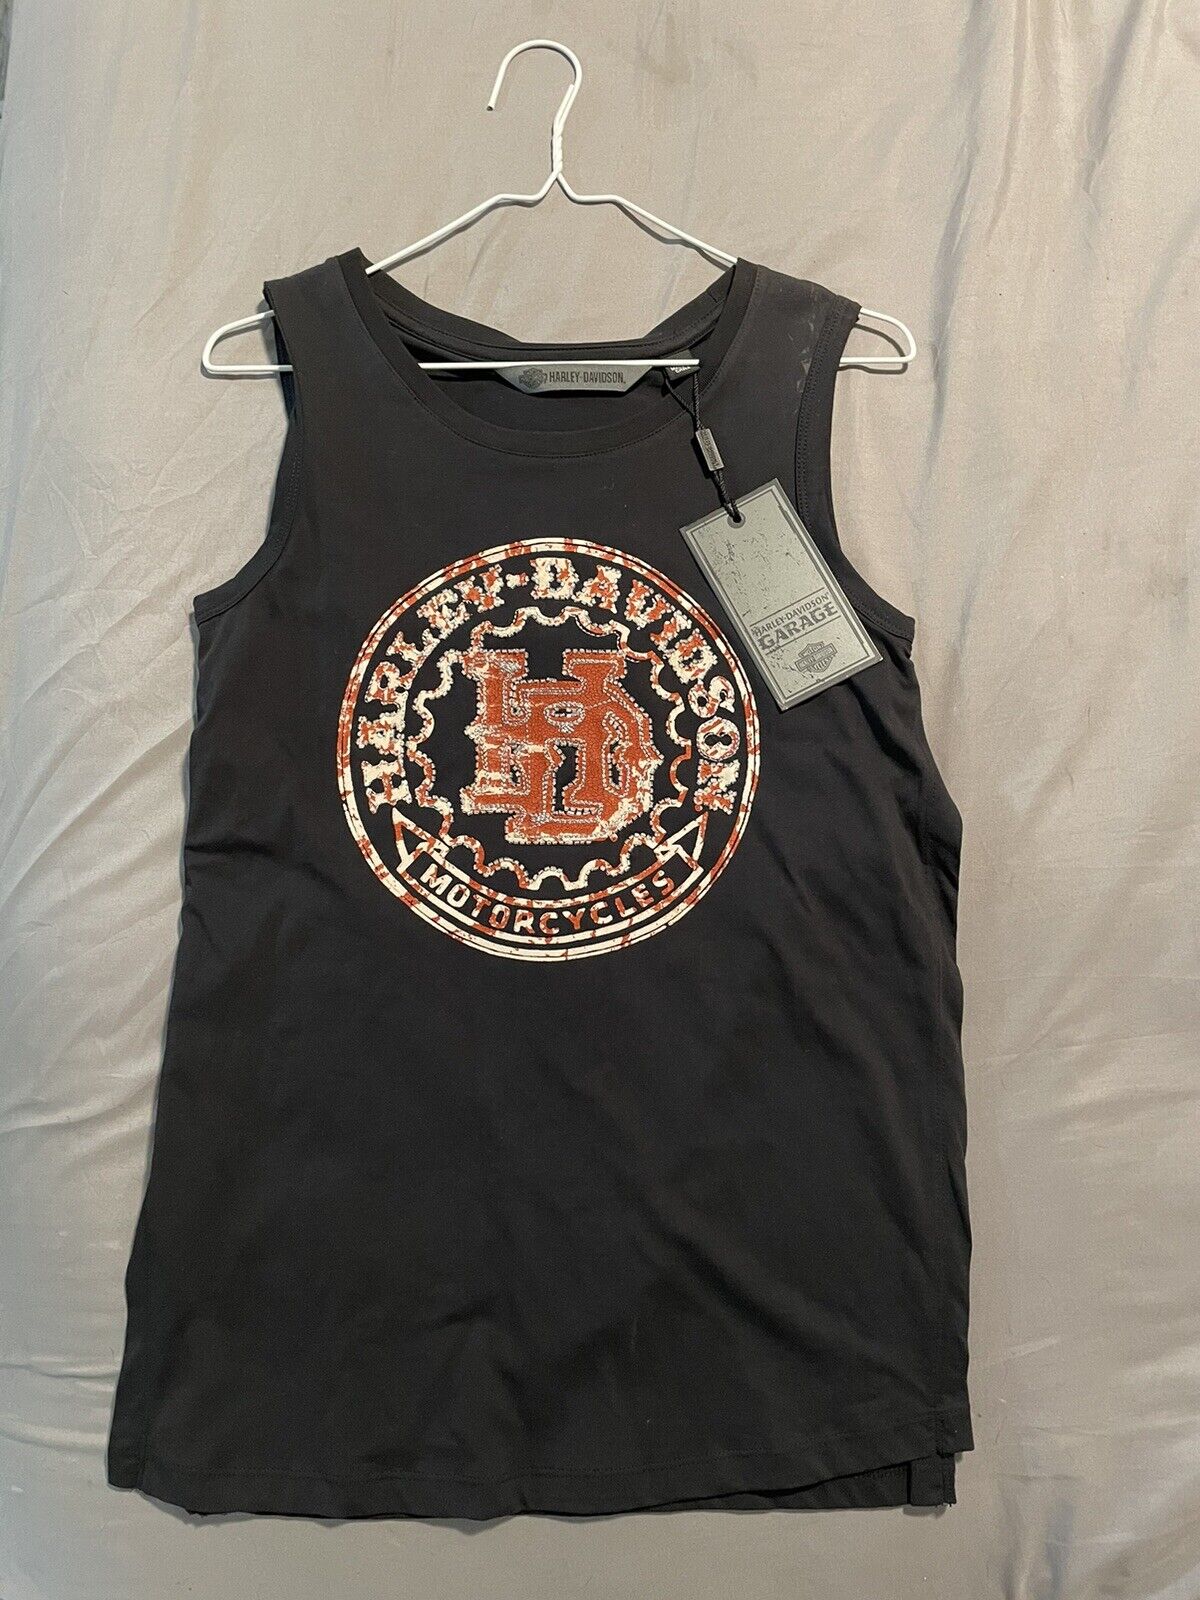 Harley Davidson shirt Woman’s XS Split Side Tank Top New With Tags